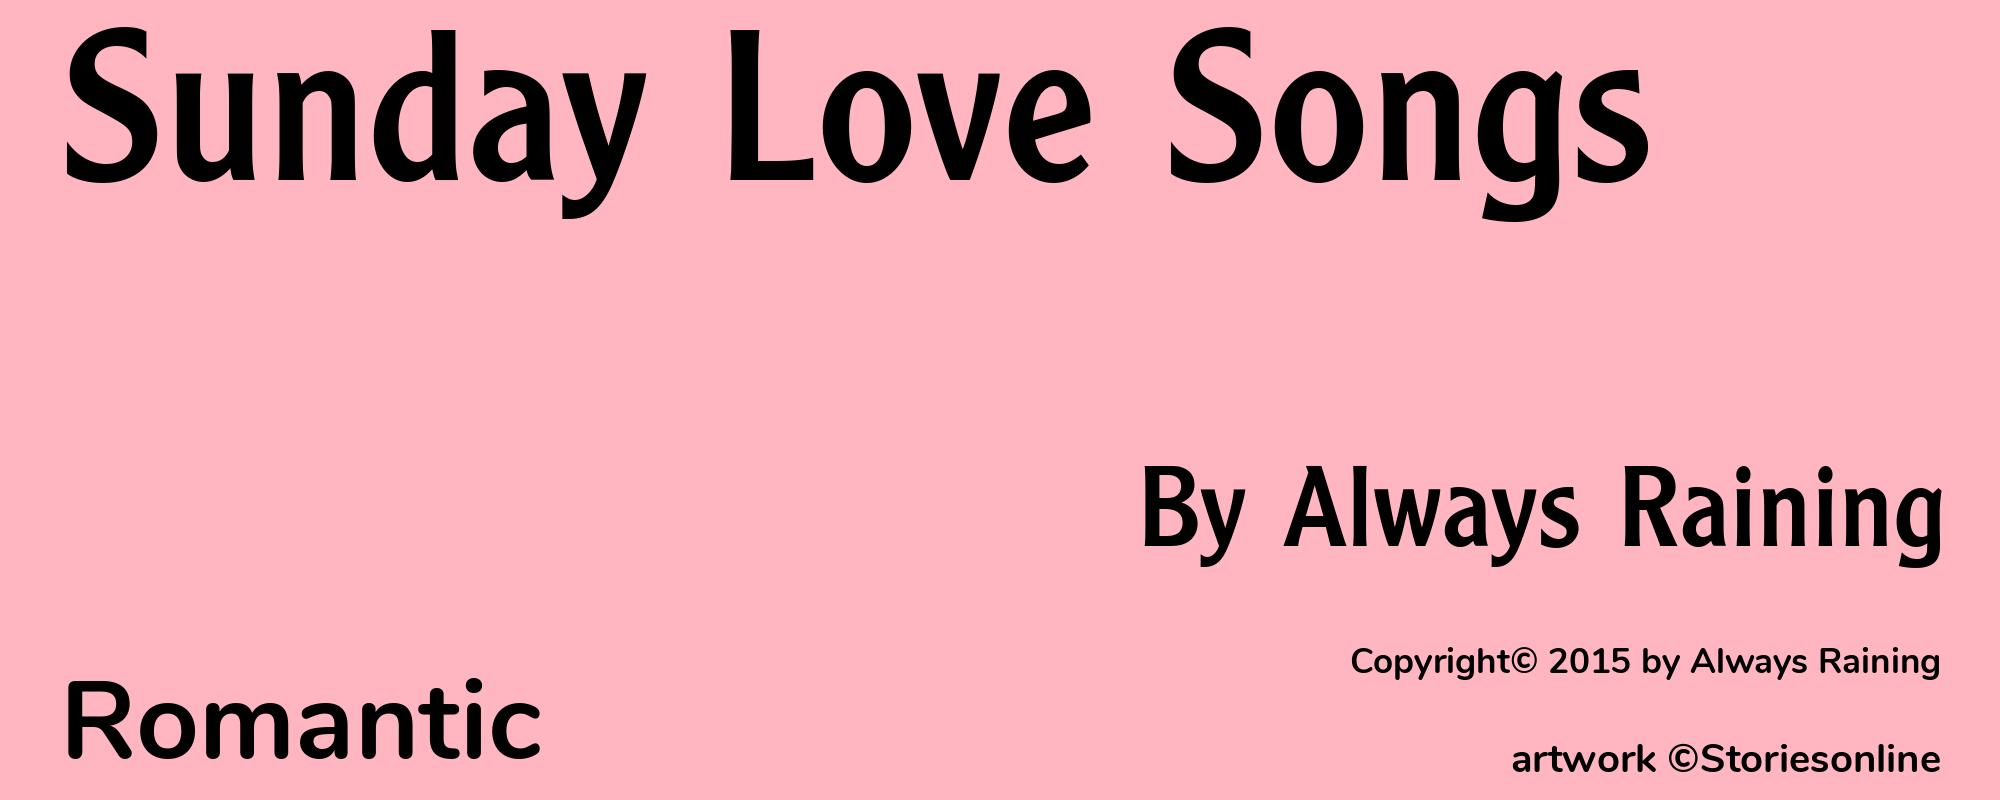 Sunday Love Songs - Cover